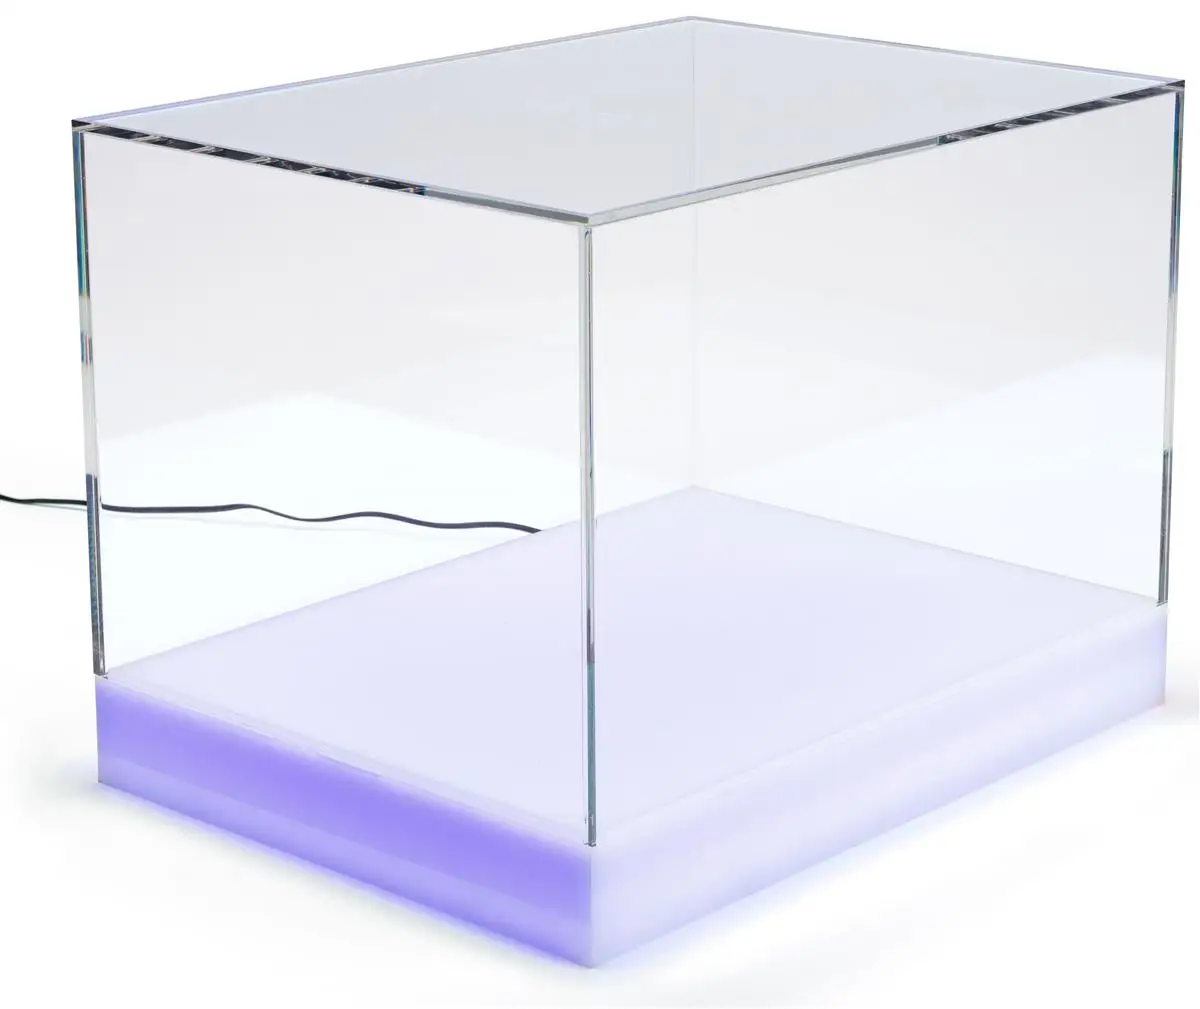 Acrylic Display Case with Lights